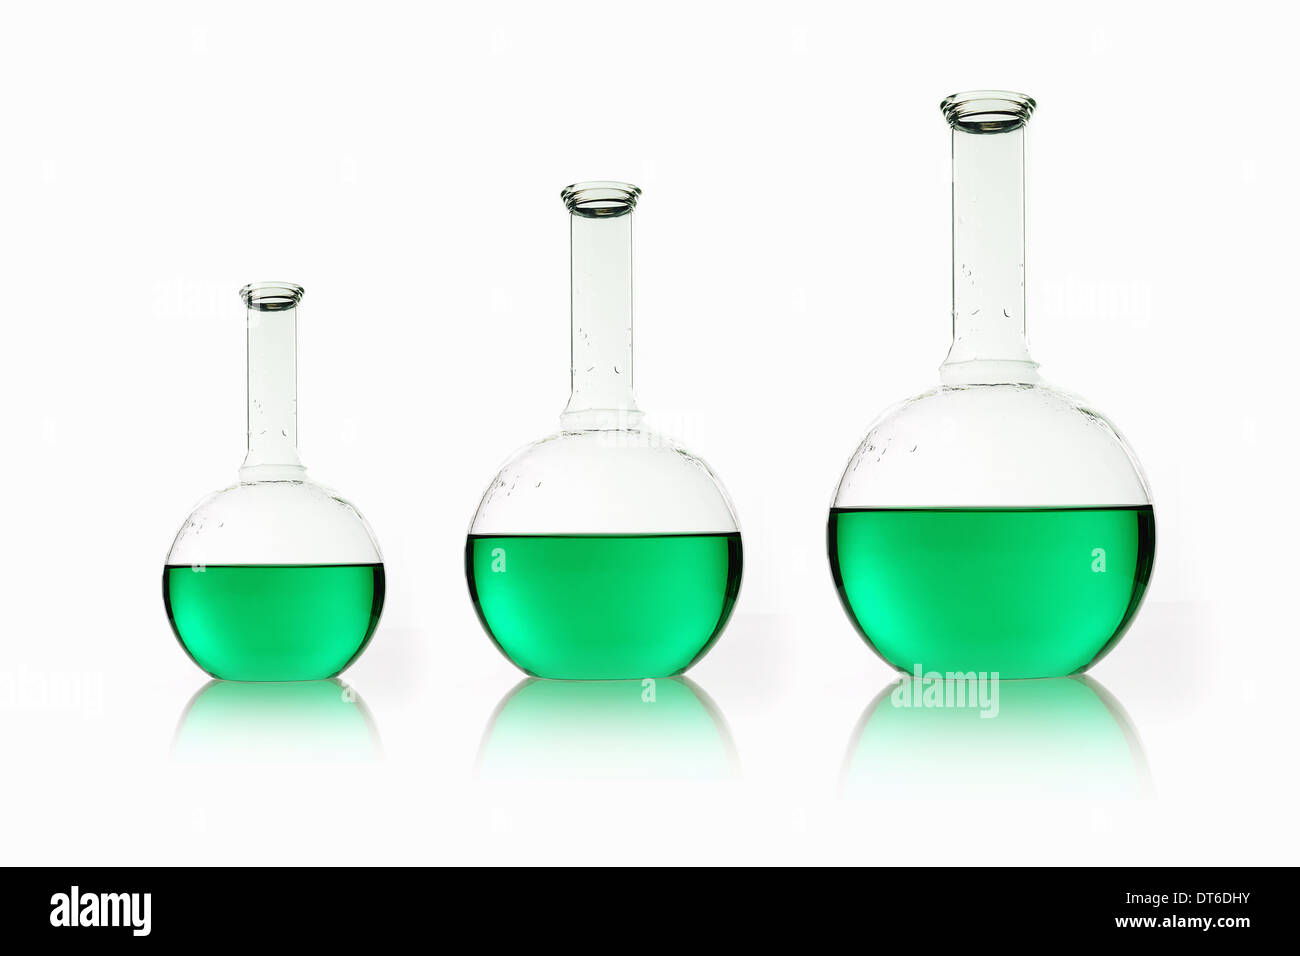 Three rounded shaped scientific chemical flasks holding green liquid, arranged in size order. Stock Photo